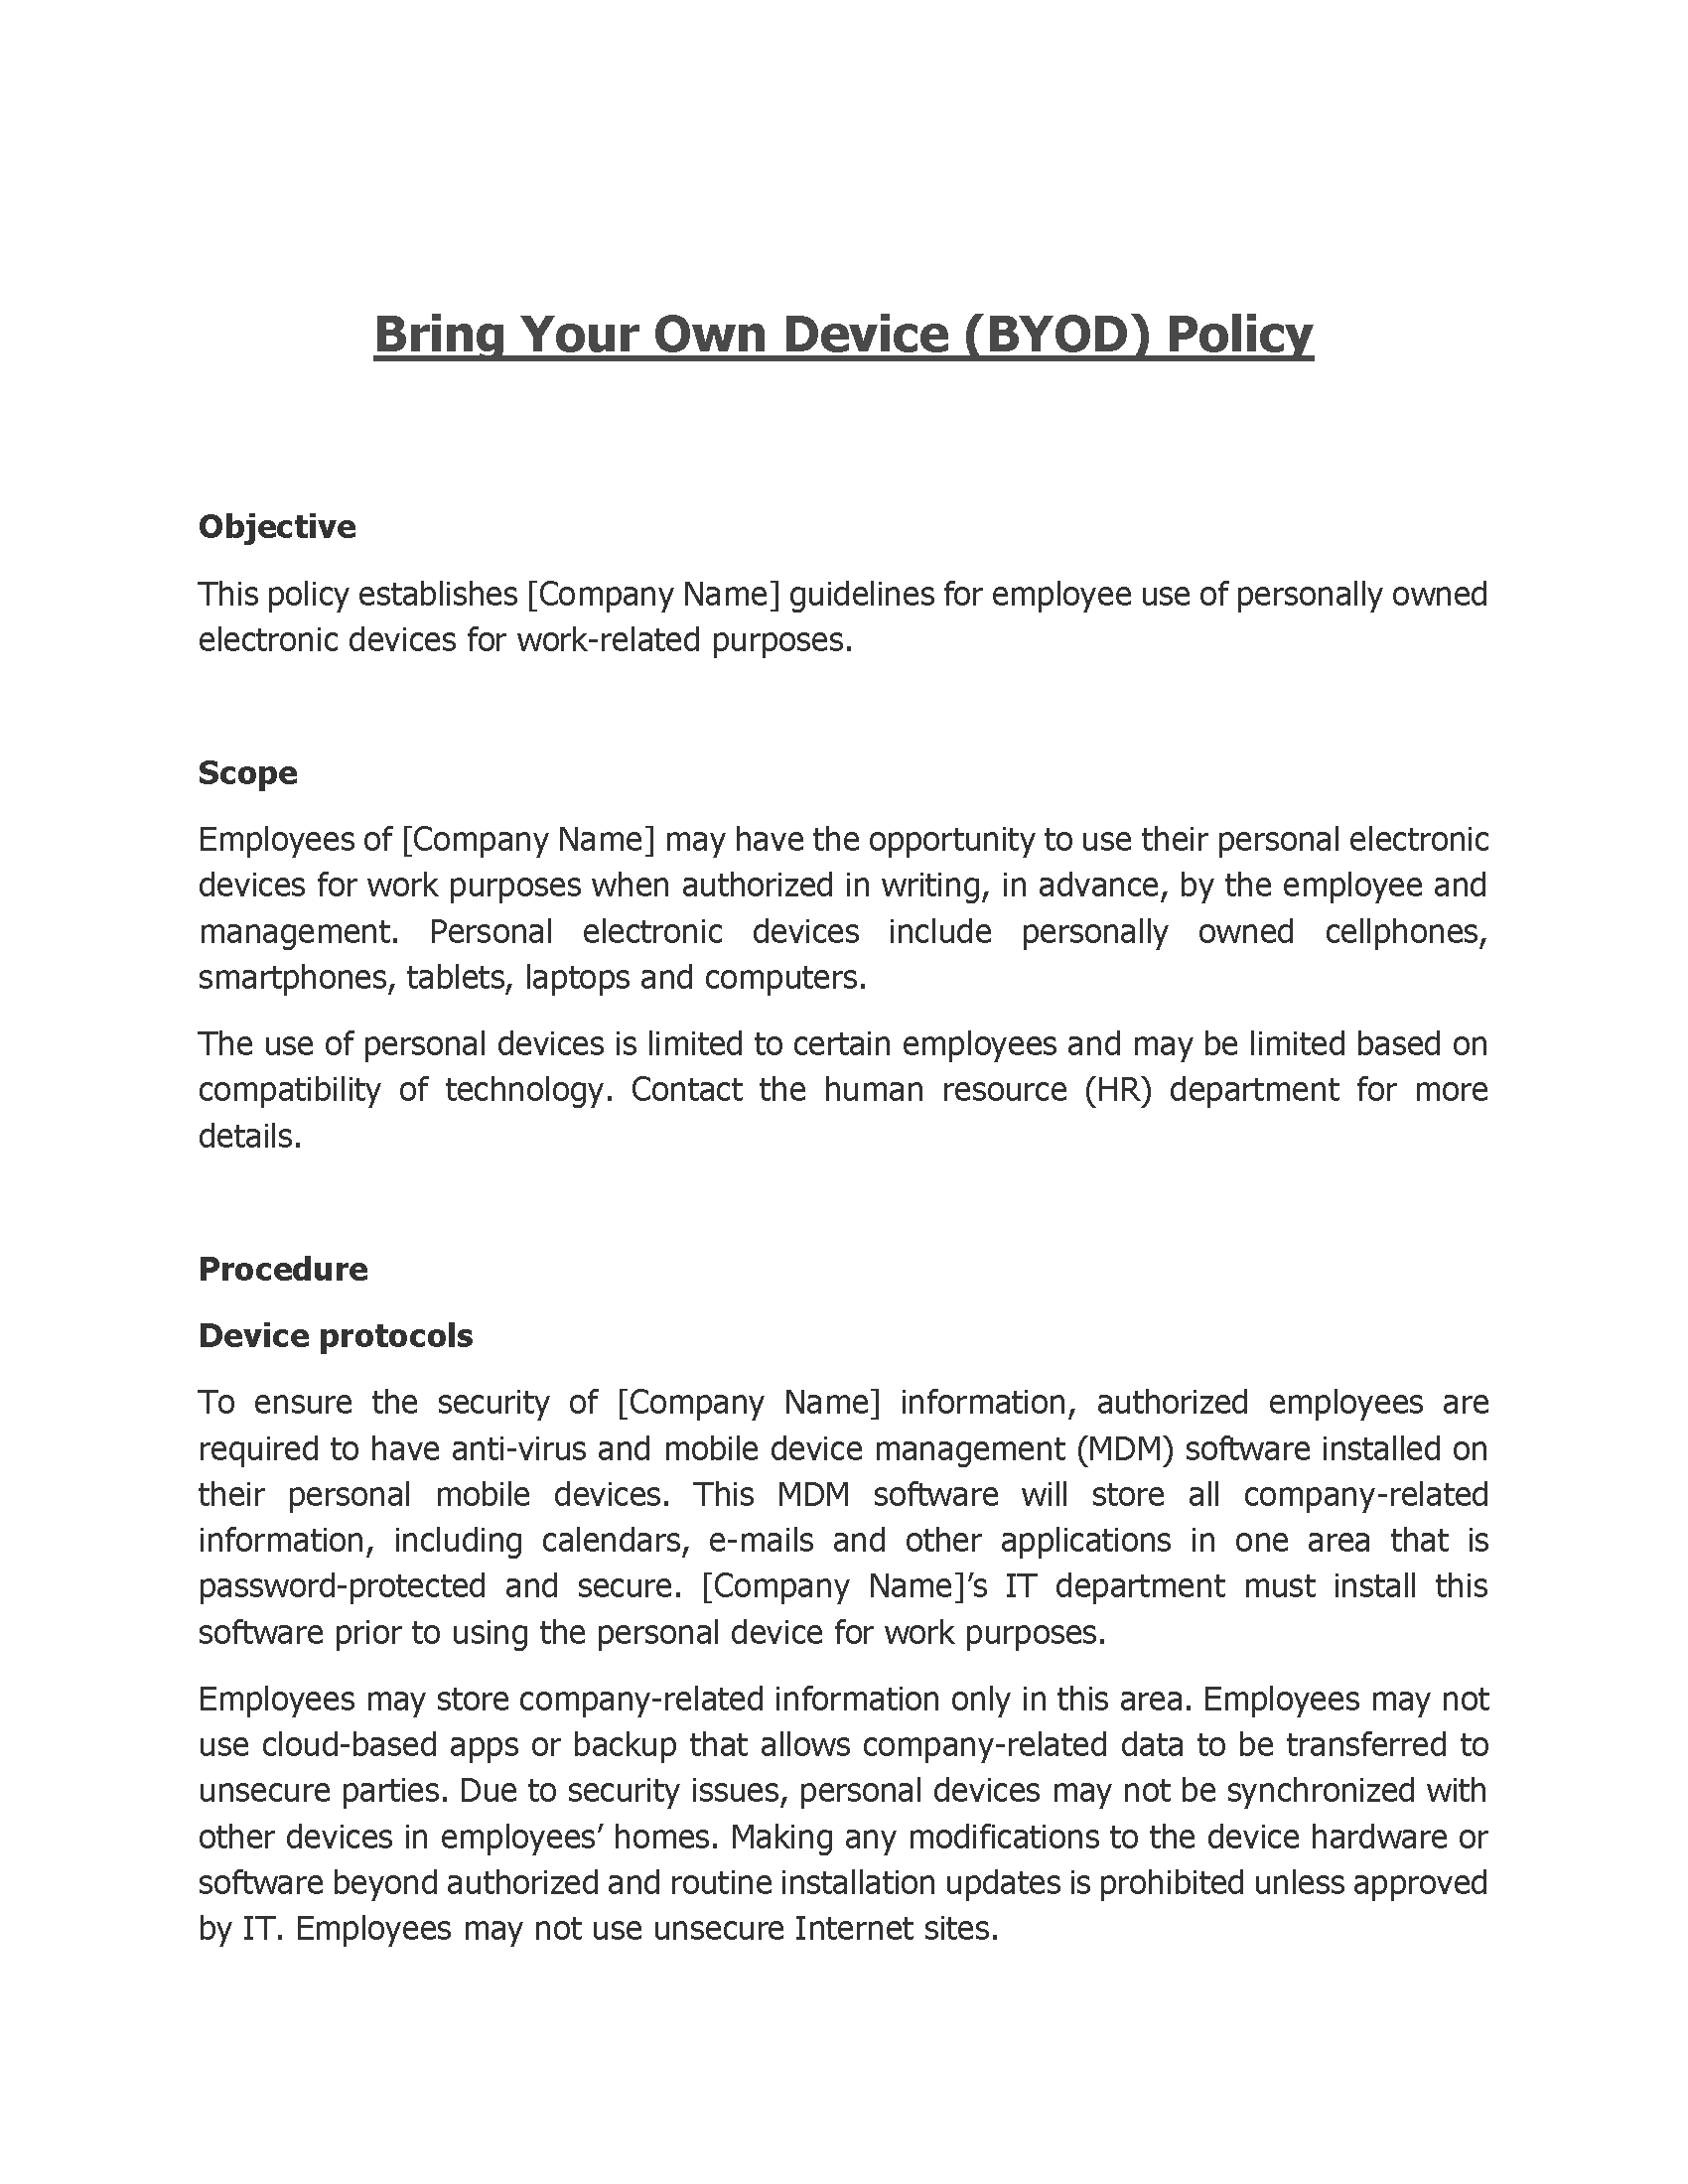 36 - Bring Your Own Device Policy